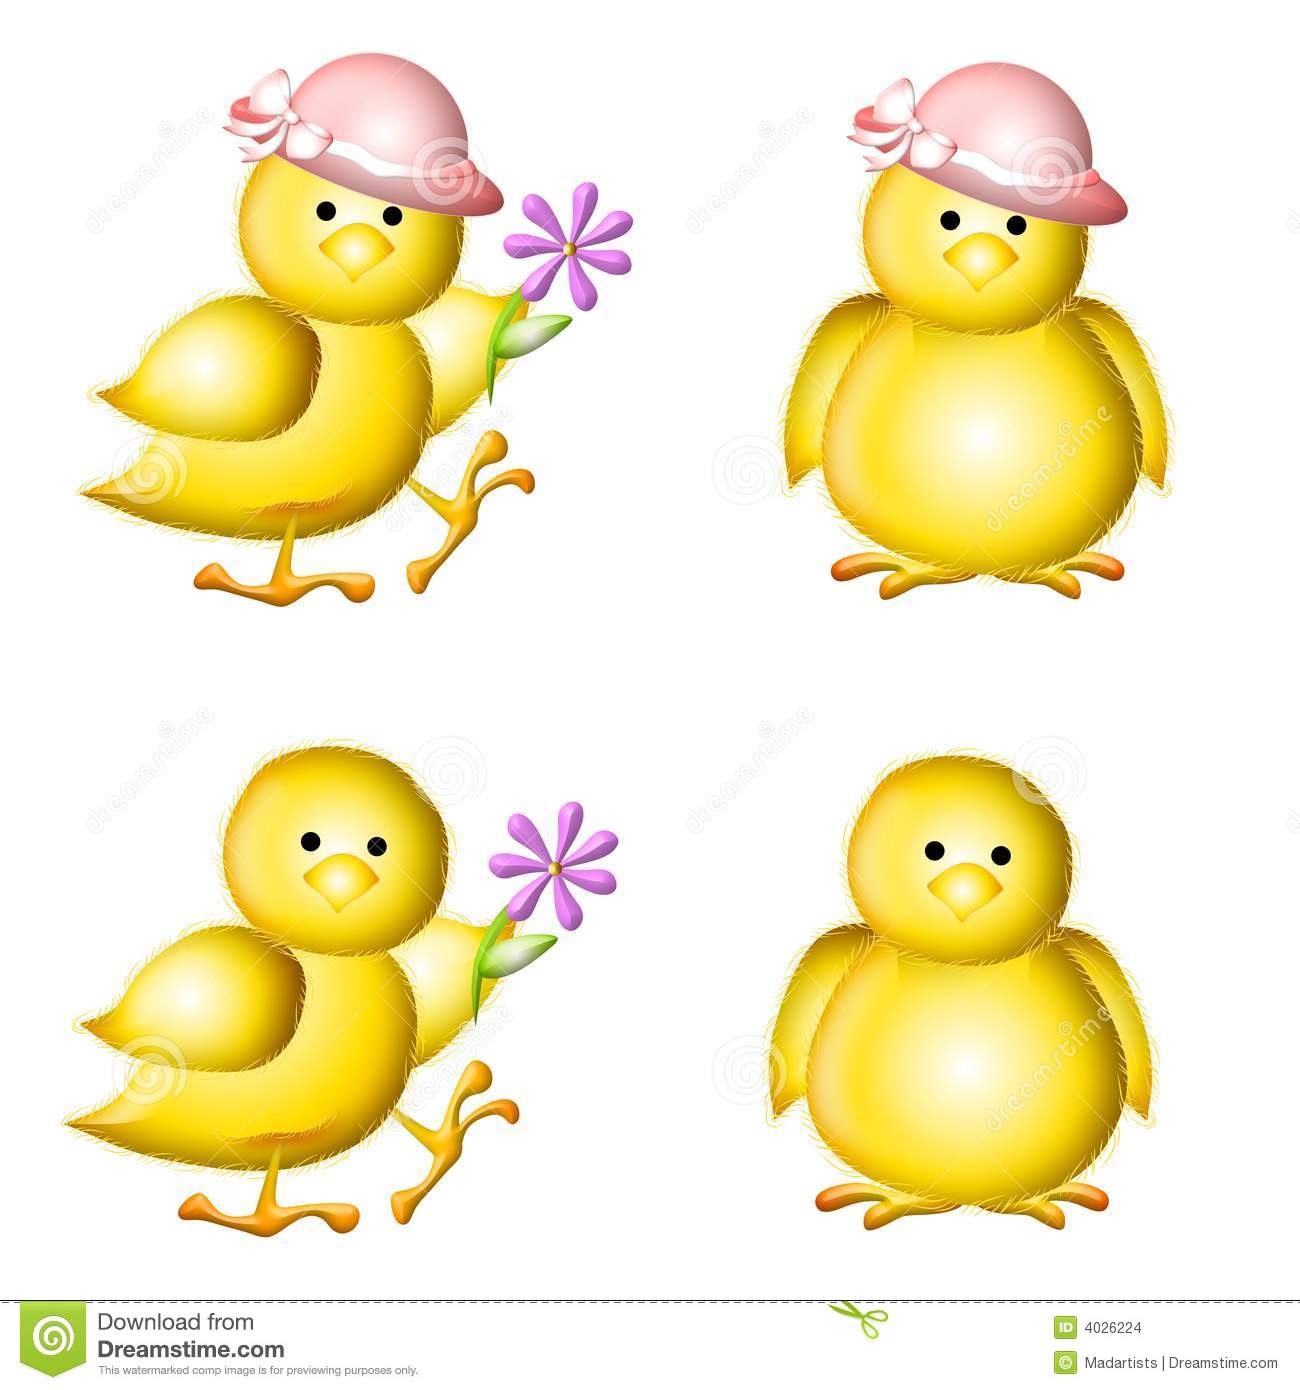 Chicks Wearing Hats And Holding Flowers Isolated For Easy Placement